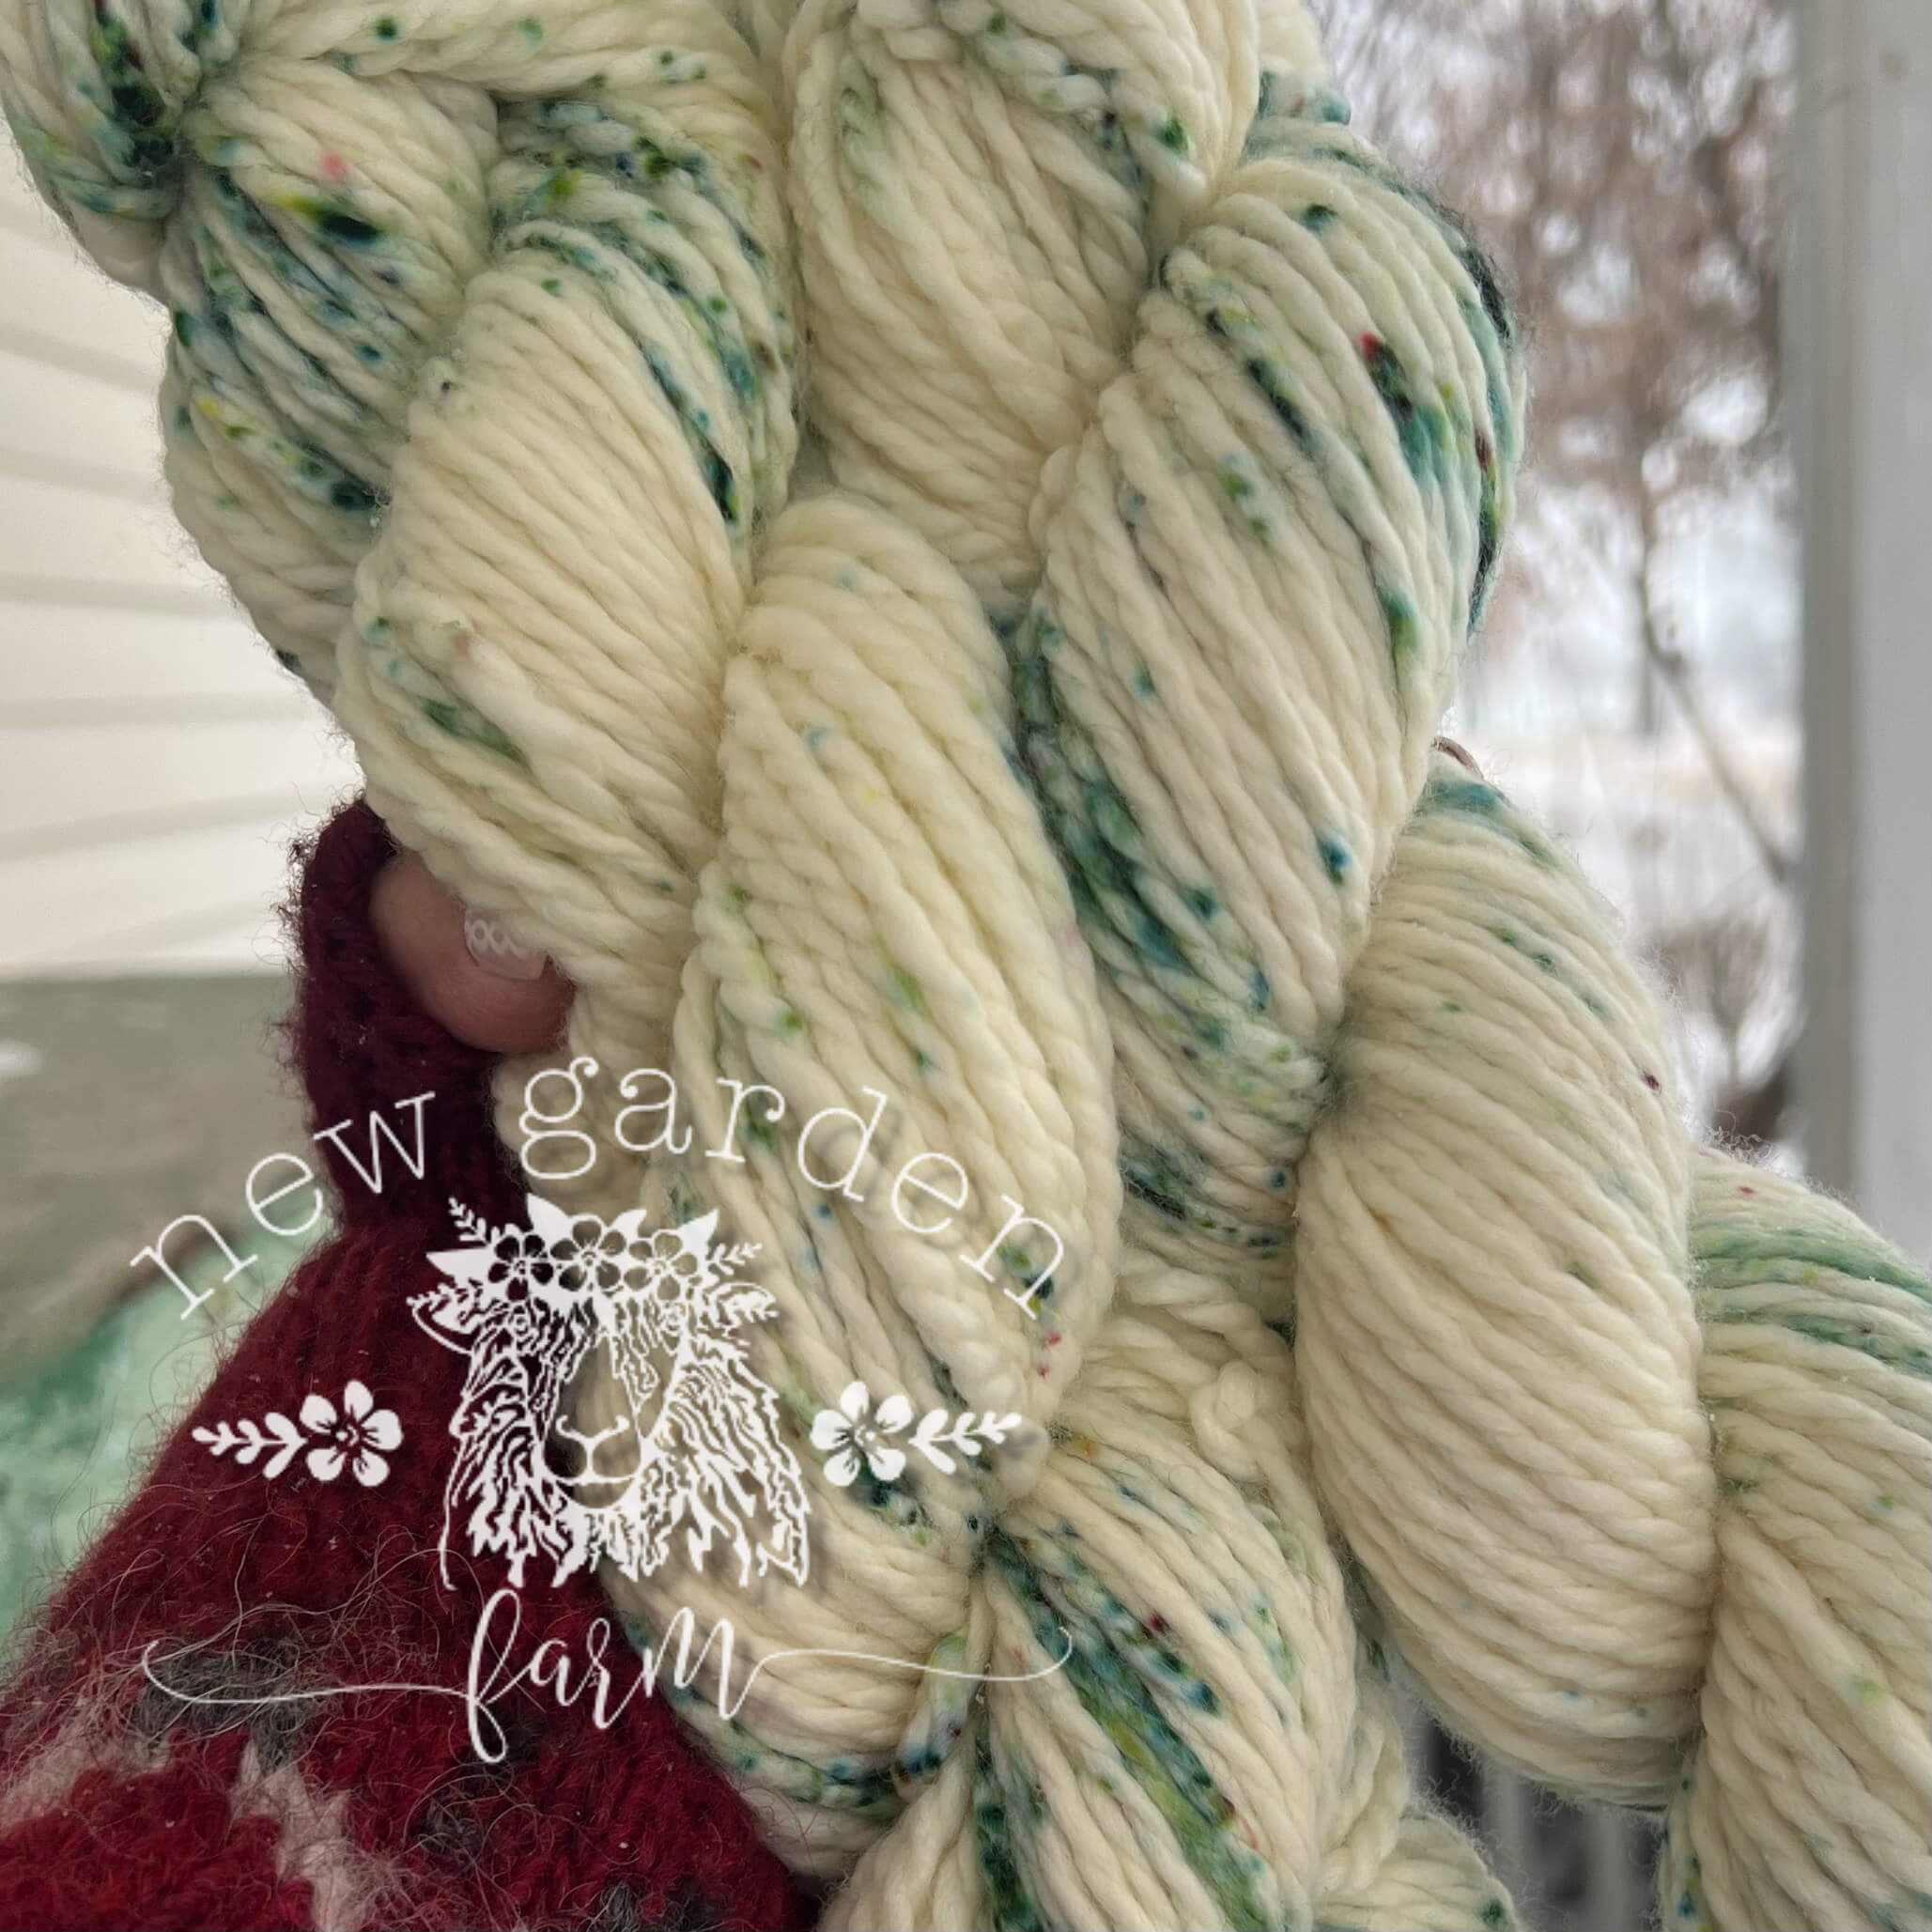 Creamy natural white with green speckles hand dyed yarn for knitting or crochet